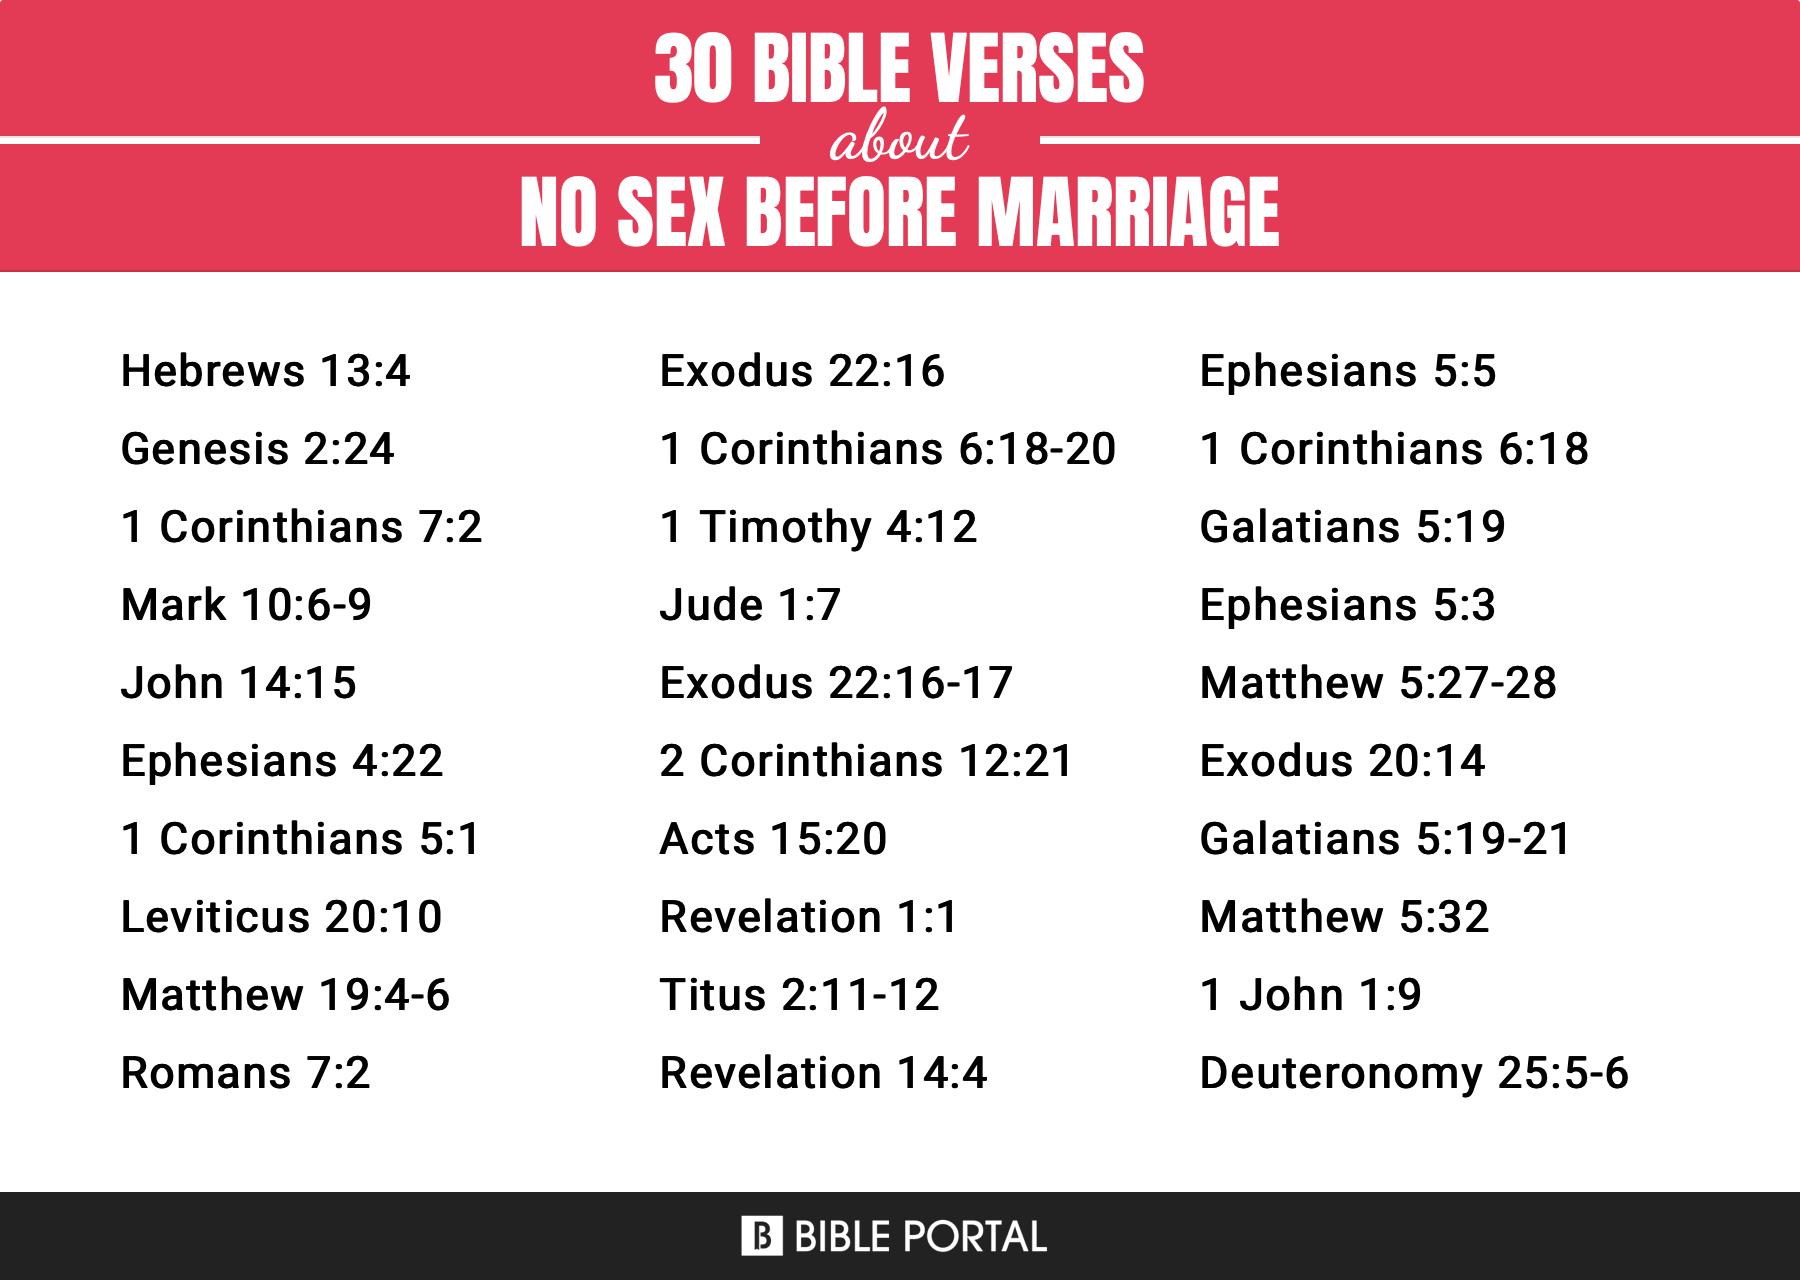 44 Bible Verses about No Sex Before Marriage?